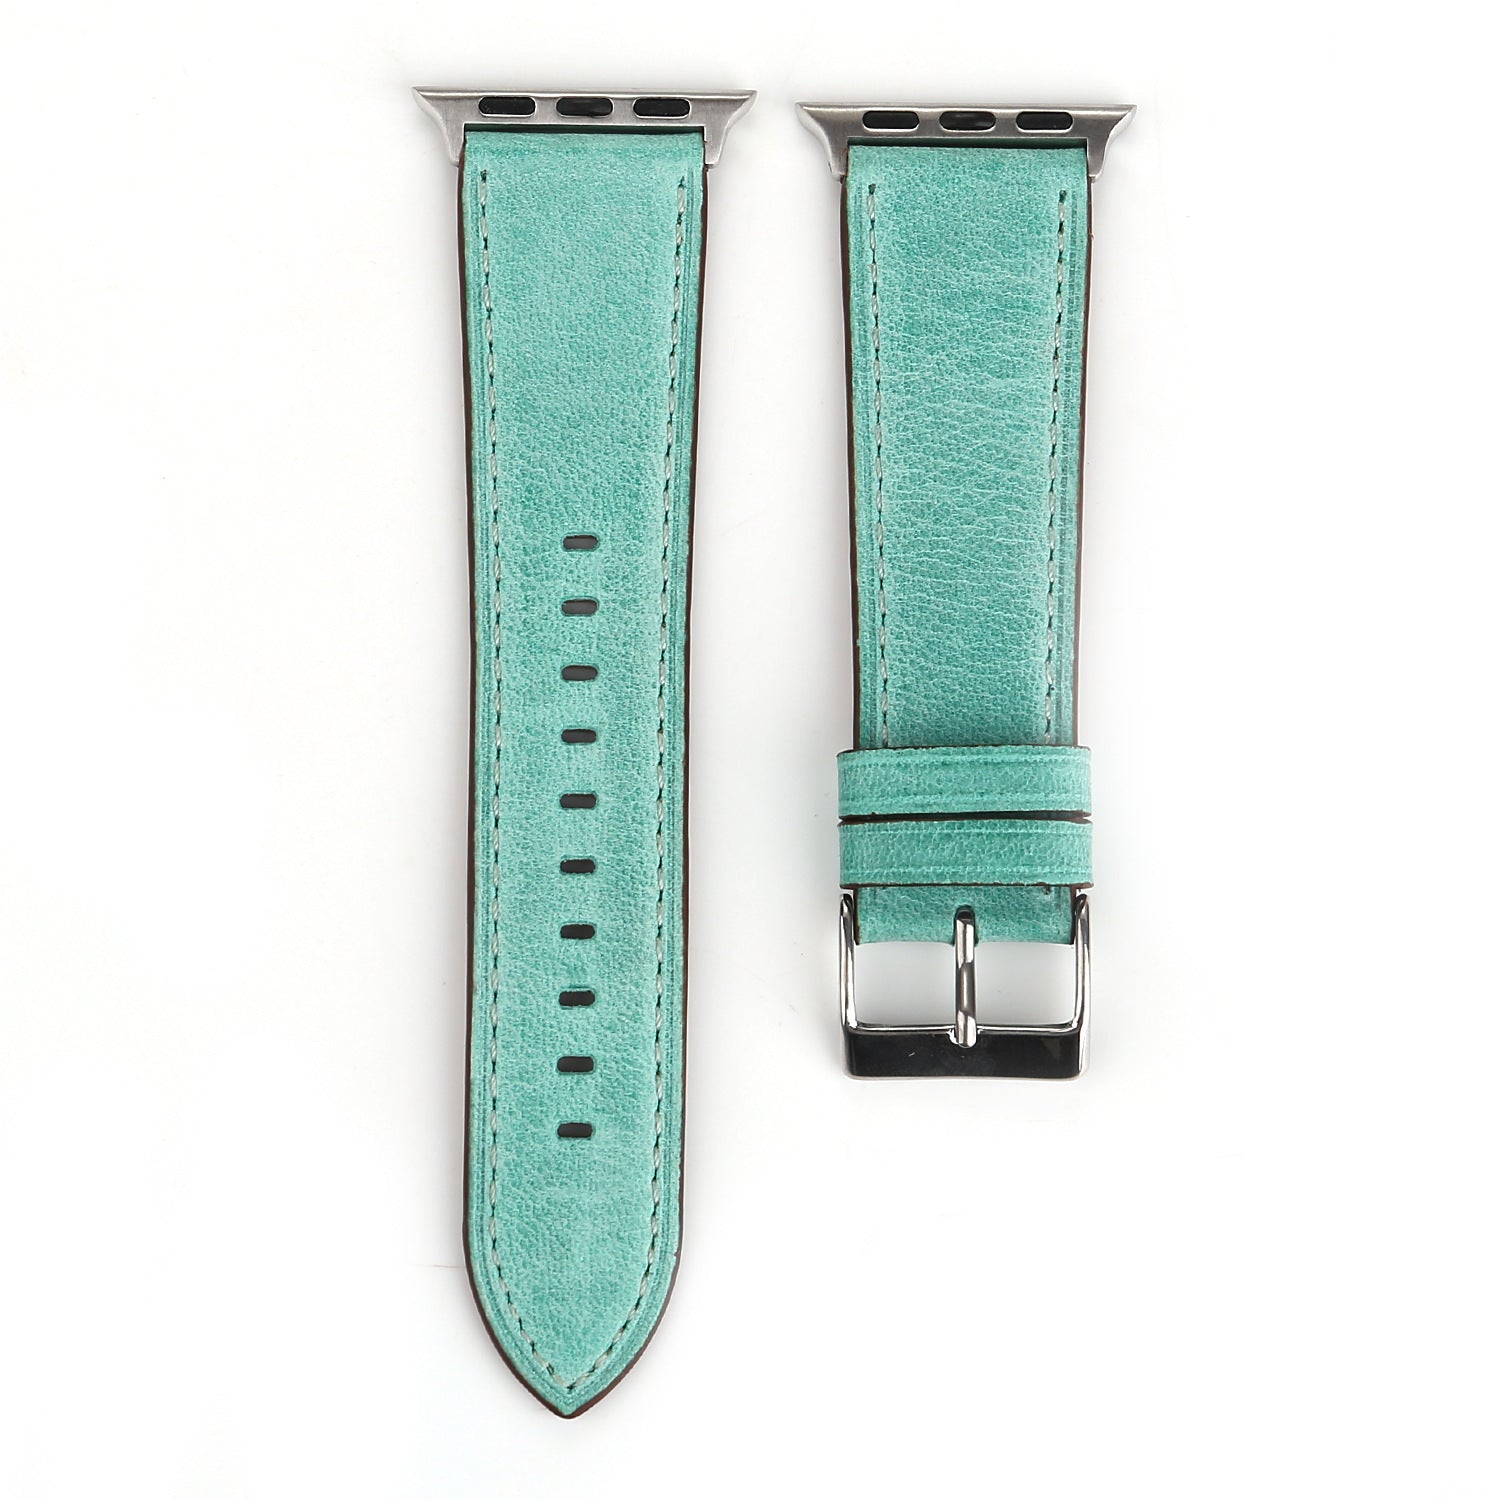 Genuine leather smart watch strap with stainless steel buckle - Smart Watch South Africa